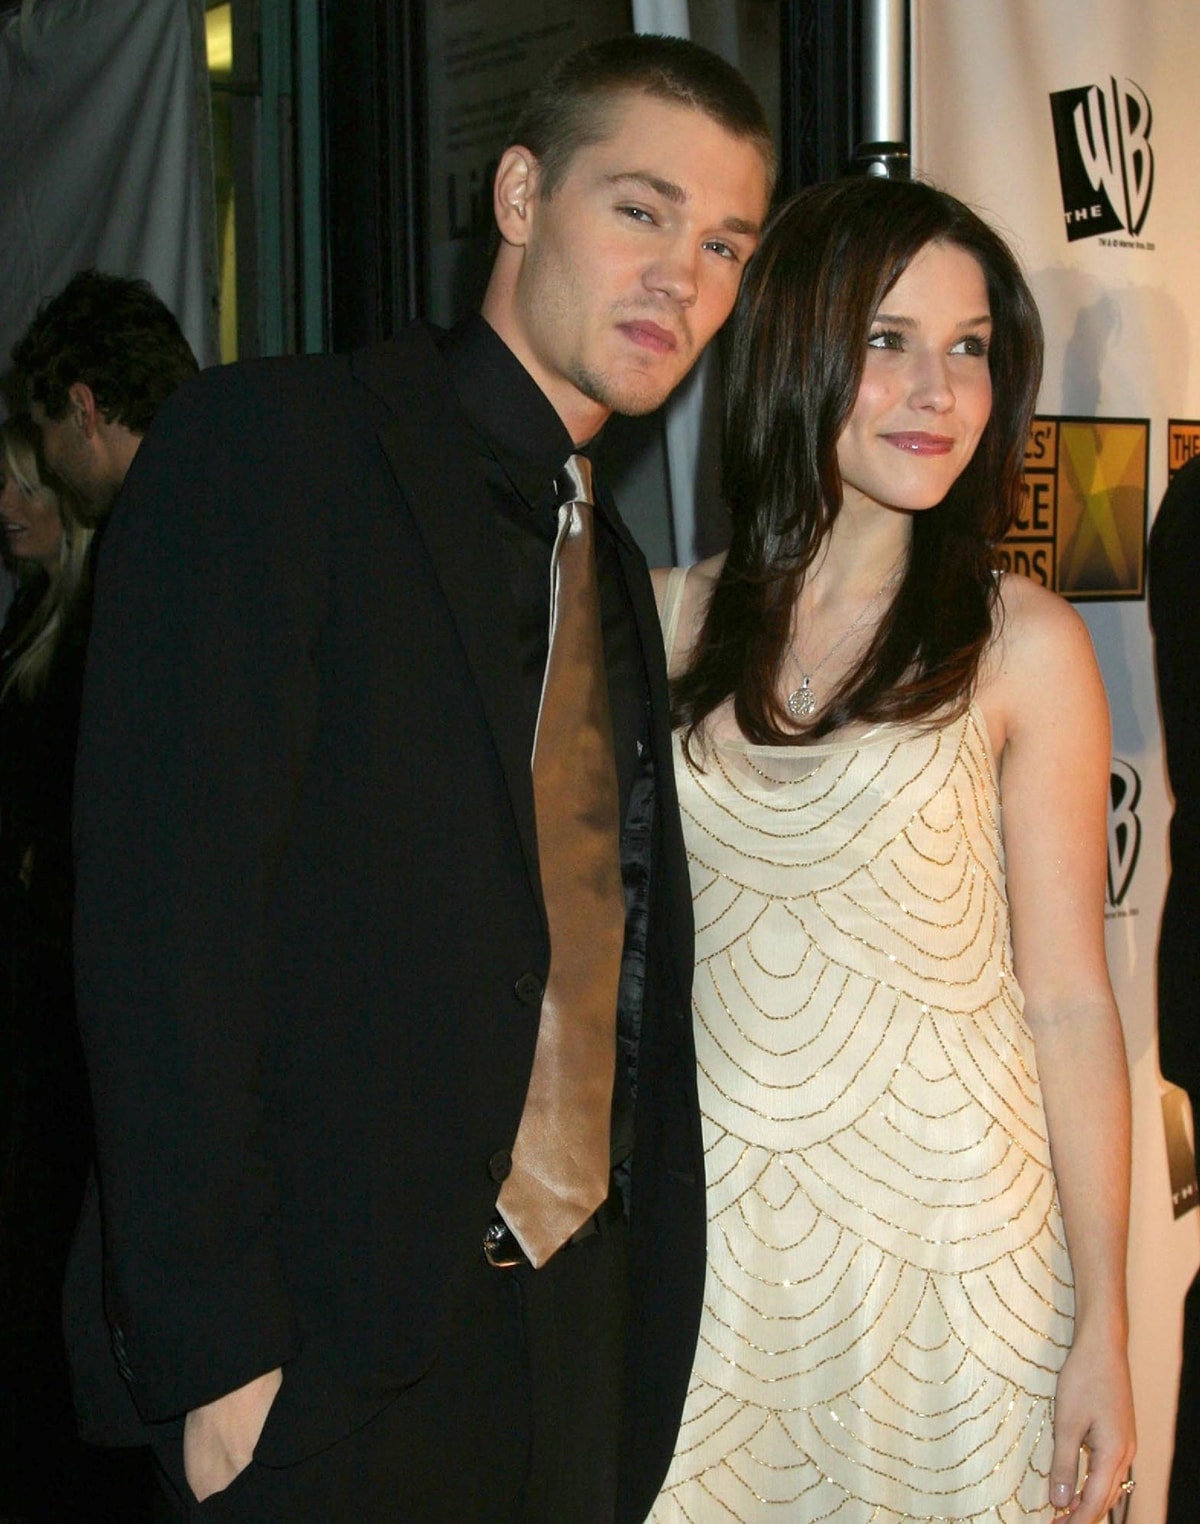 Sophia Bush and Chad Michael Murray fell in love after meeting in 2003 on the set of The CW’s One Tree Hill